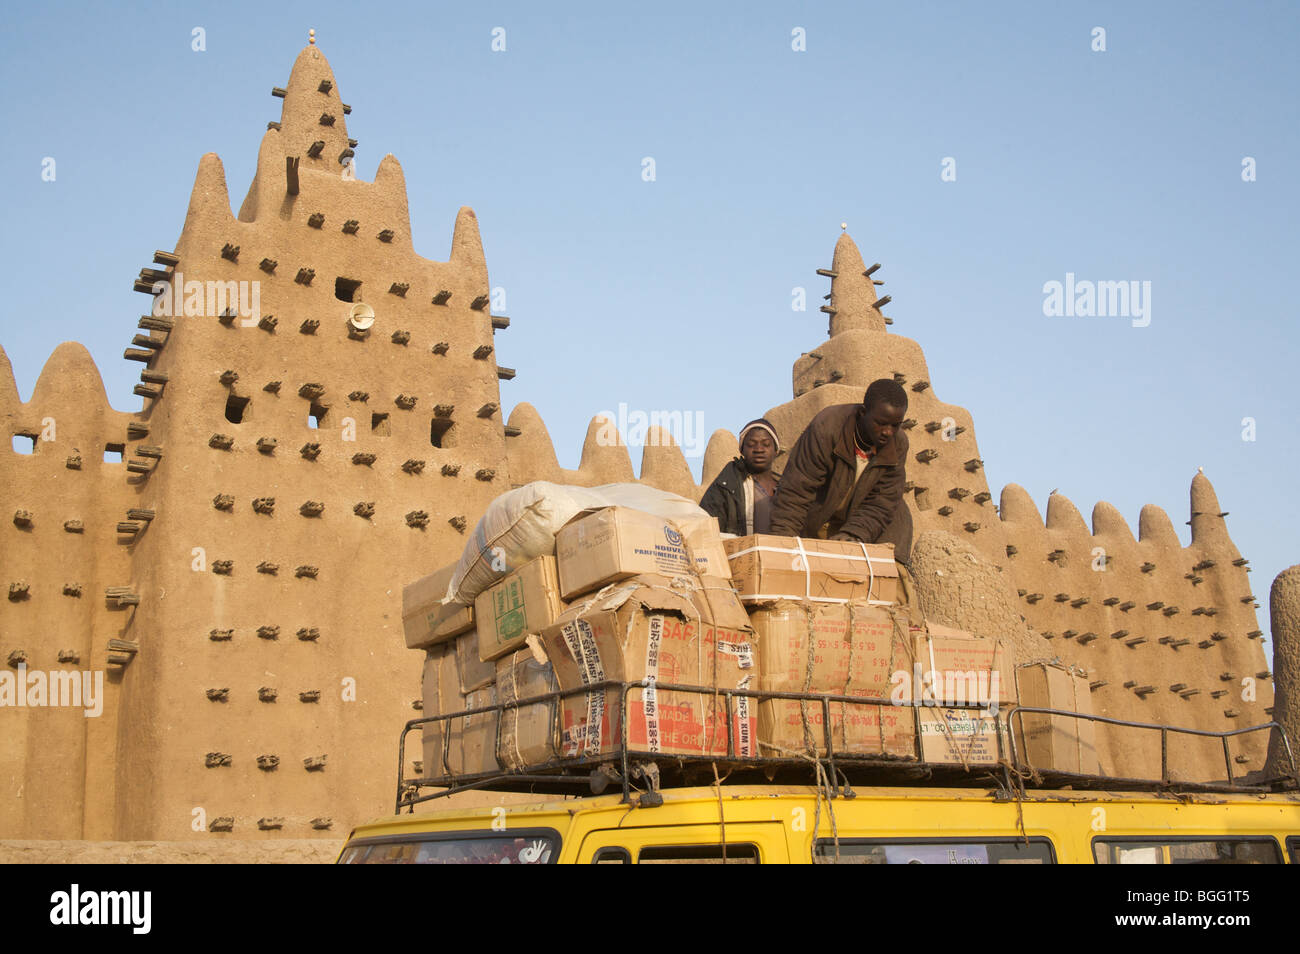 Traders unload their goods at the Monday market, infront of the great mud mosque, Djenne, Mali, West Africa Stock Photo